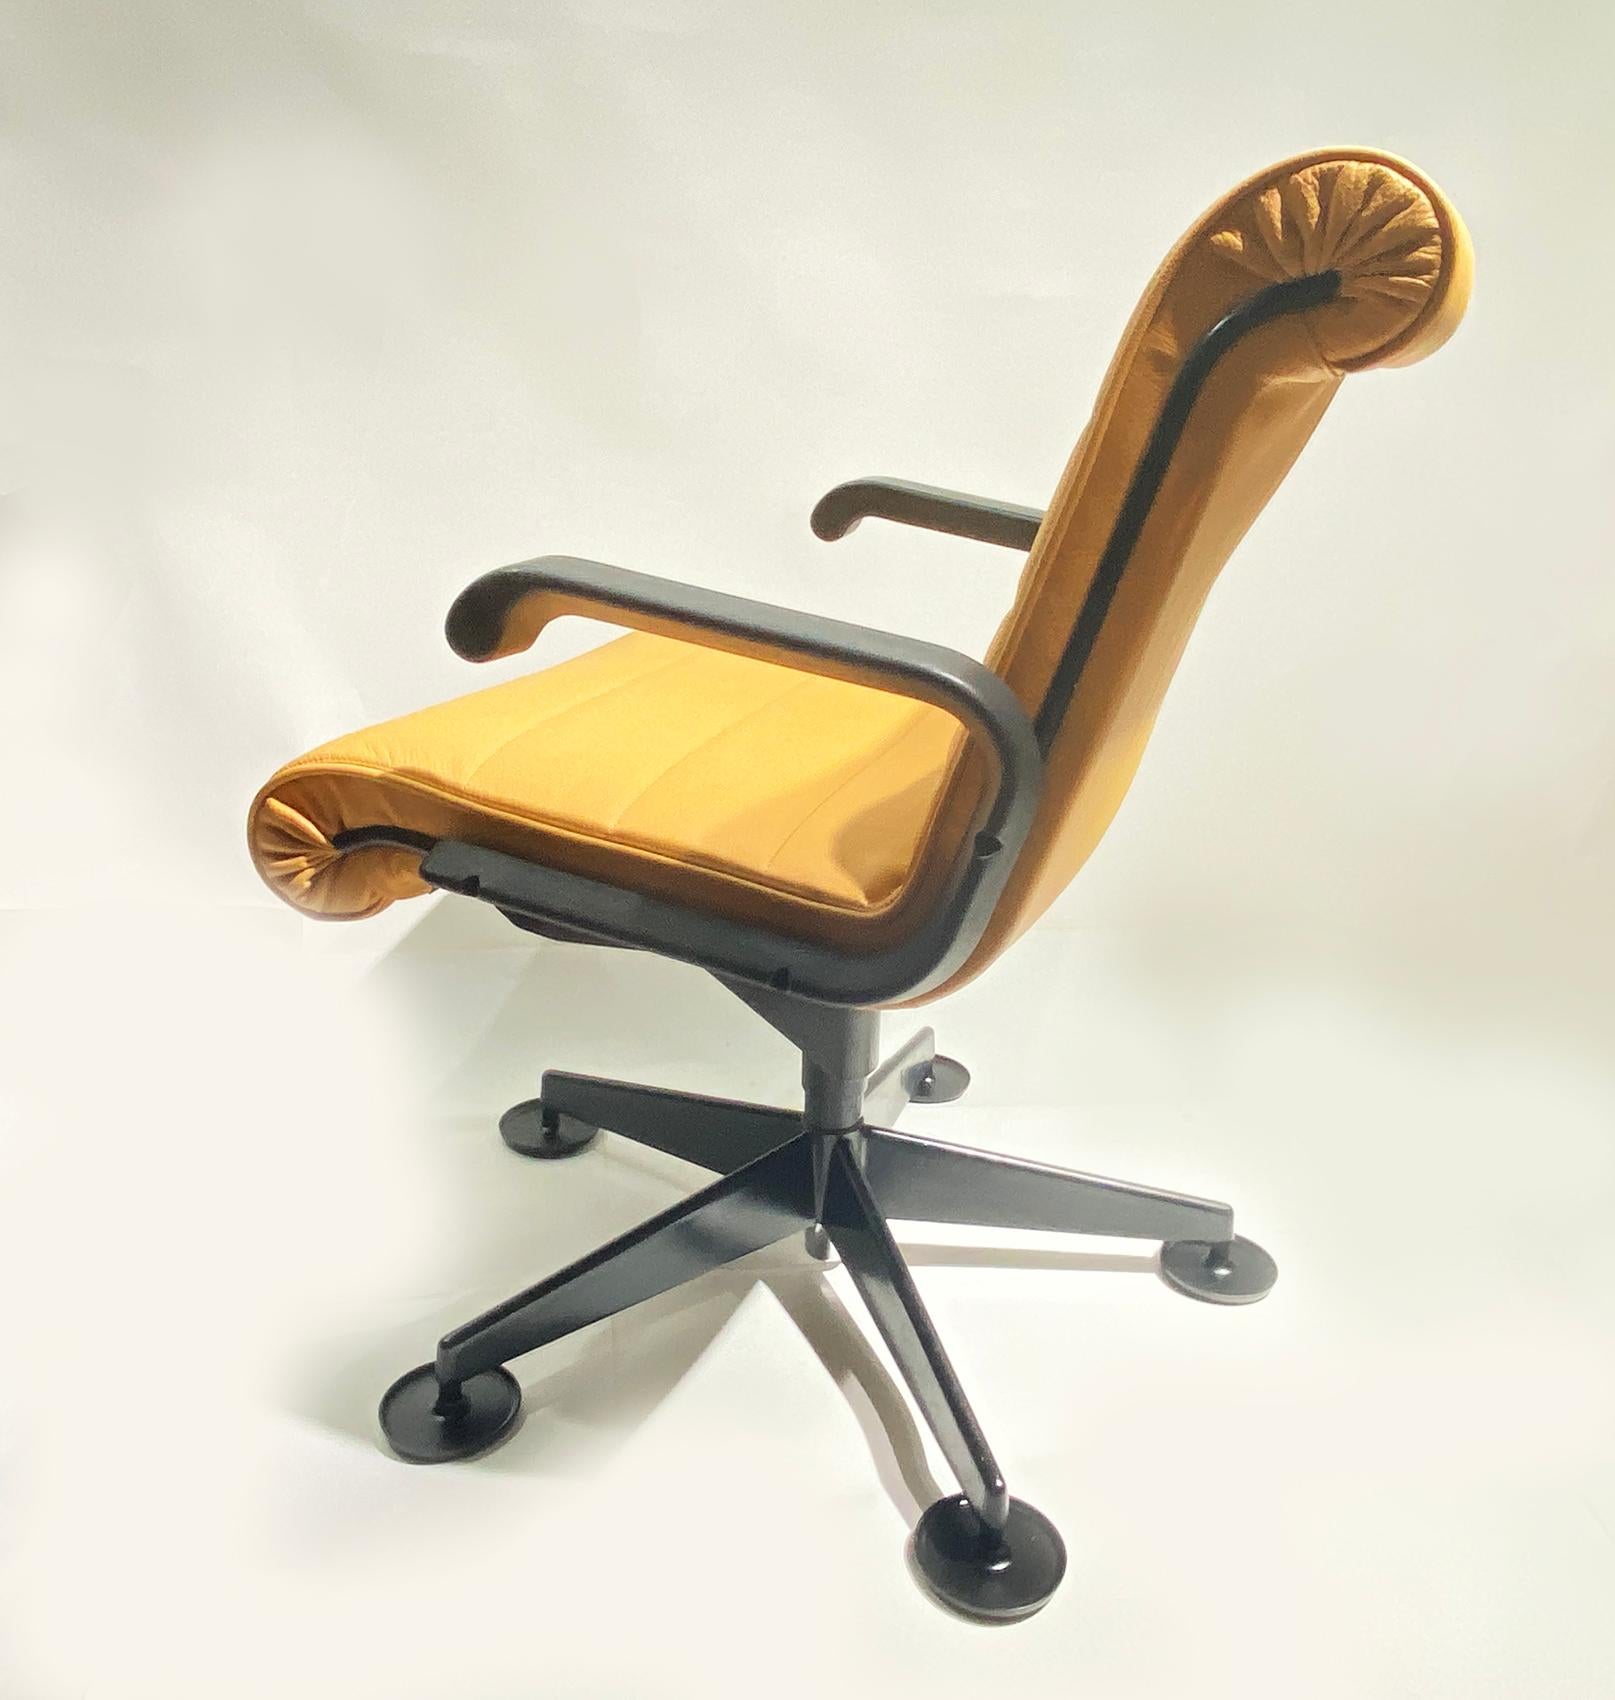 Pair of Richard Sapper for Knoll Executive Desk Chairs In Good Condition For Sale In Beirut, LB